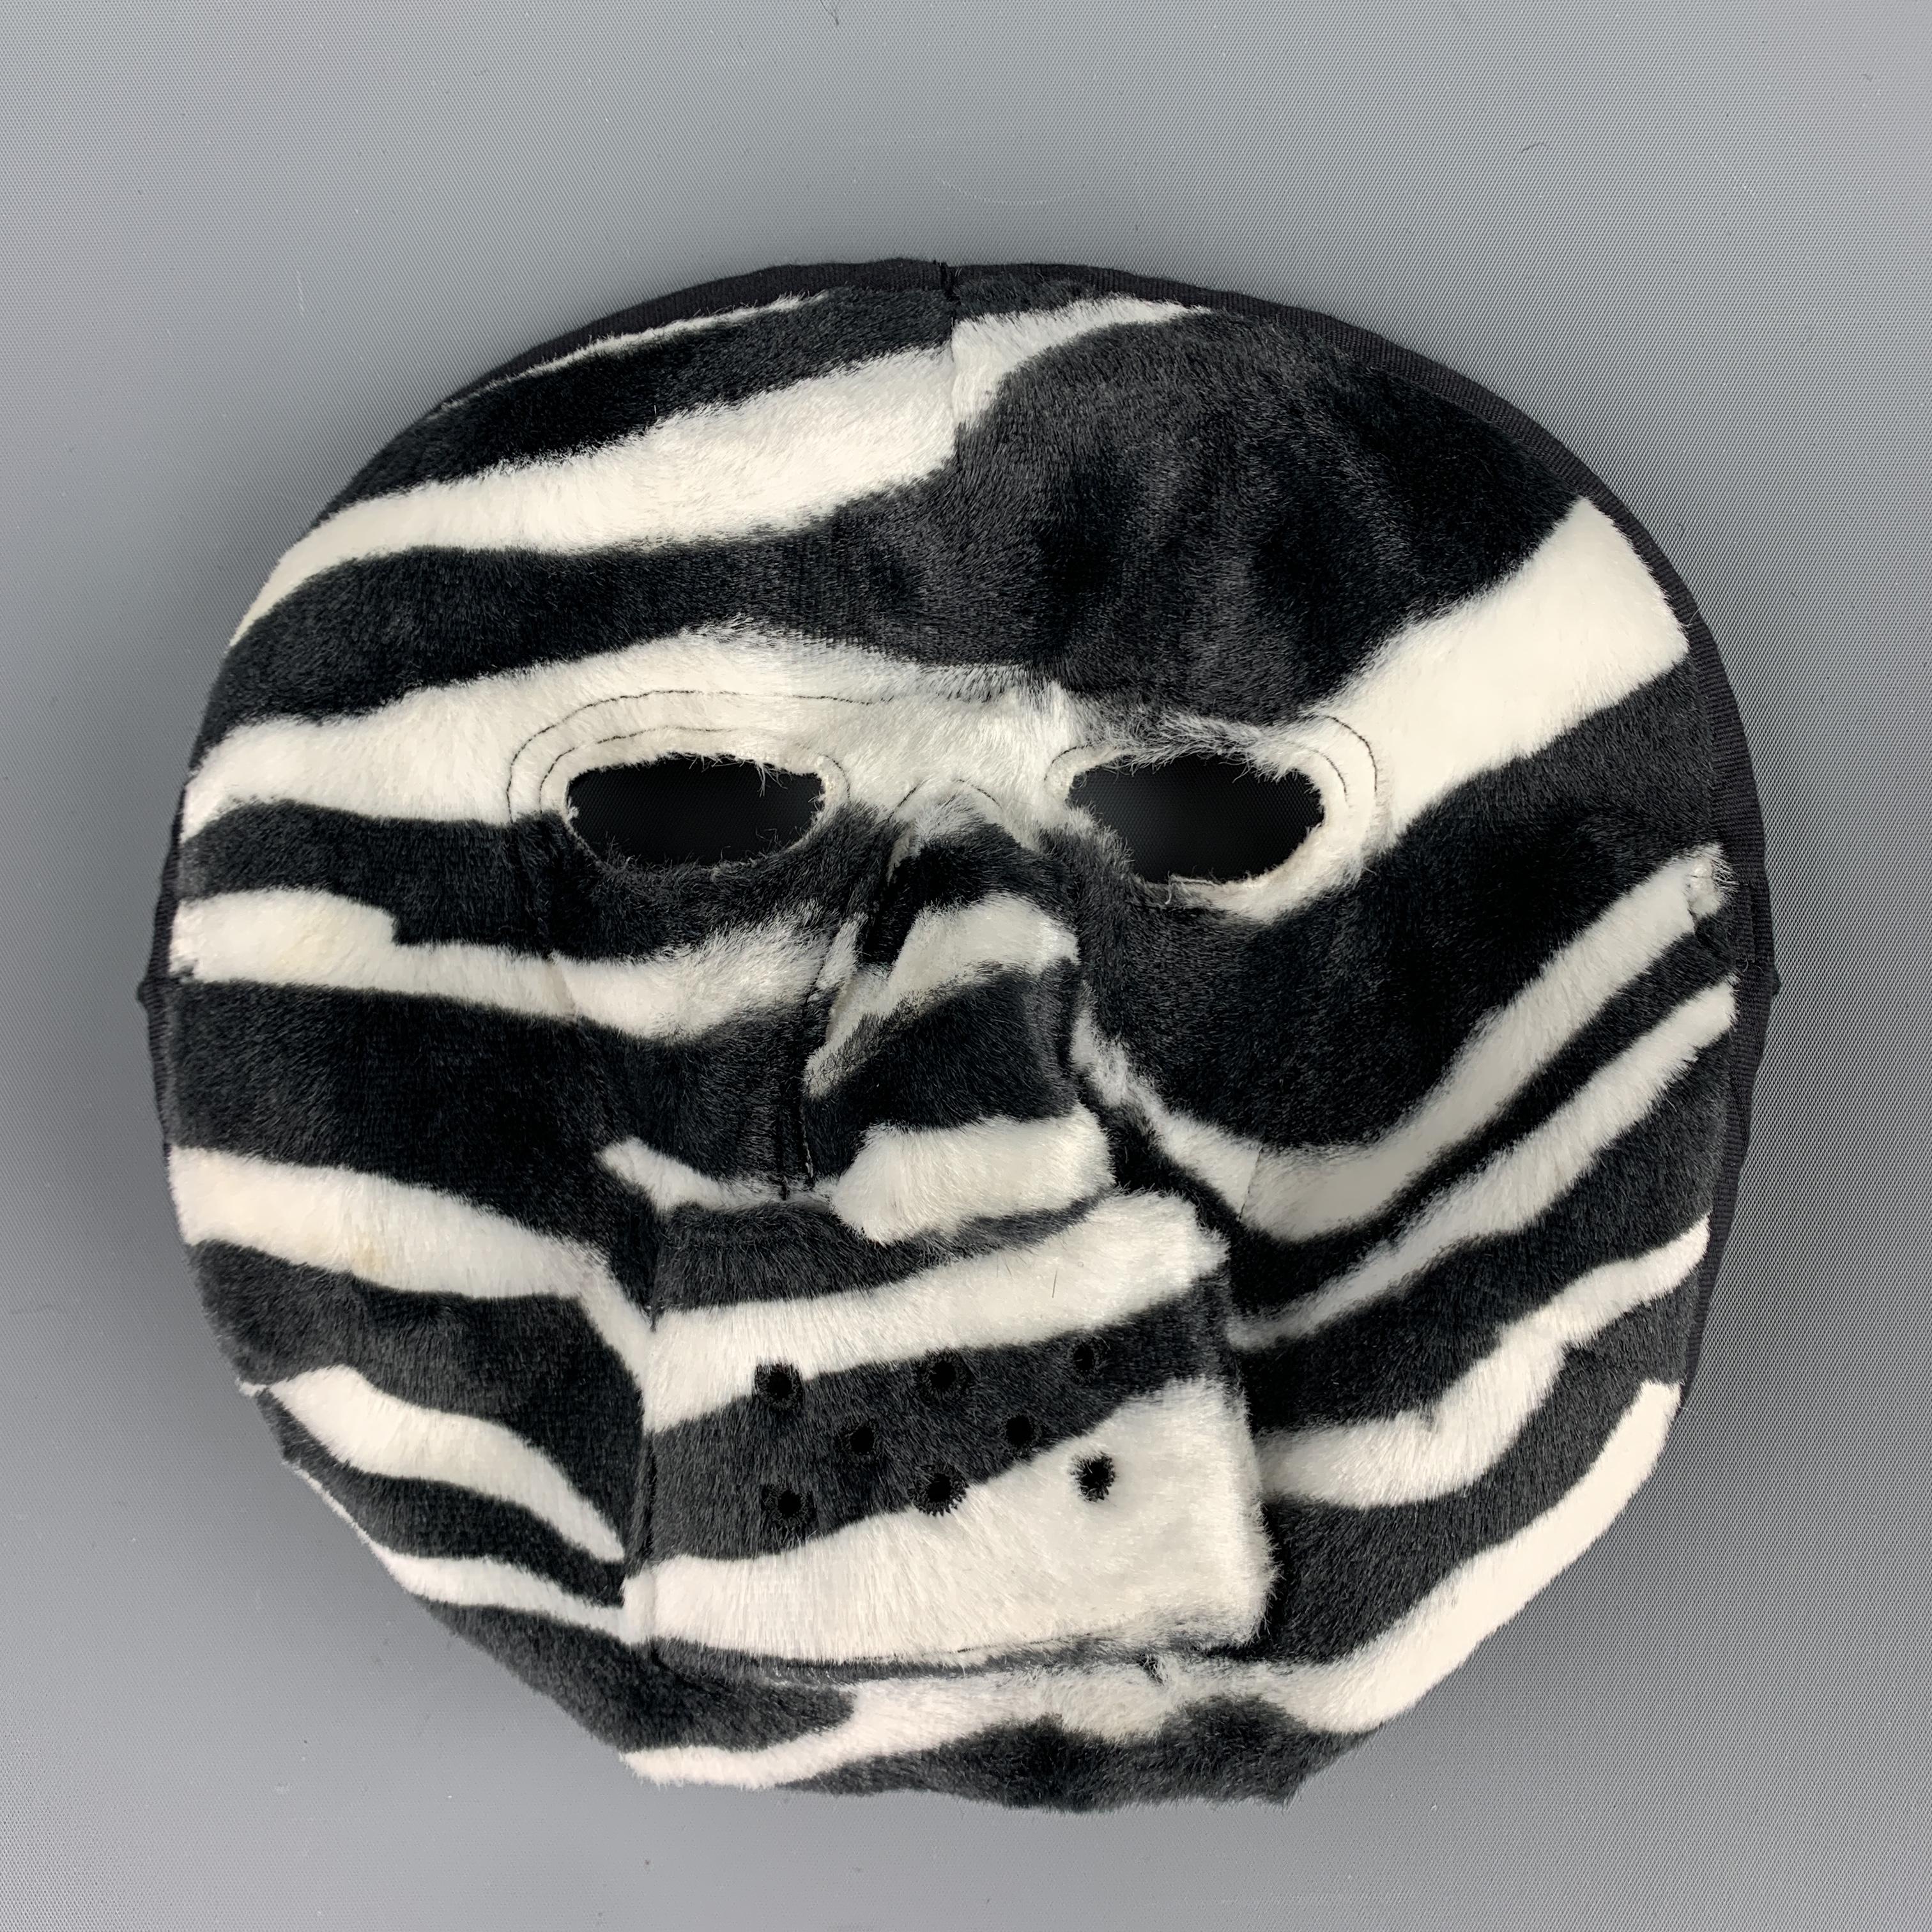 COMME des GARCONS HOMME PLUS F/W 2015 Mask comes in a zebra black and white pattern rayon material, with a cotton lining. Made in Japan.

Excellent Pre-Owned Condition.

Measurements:

Width: 9.5 in. 
Height: 10 in. 